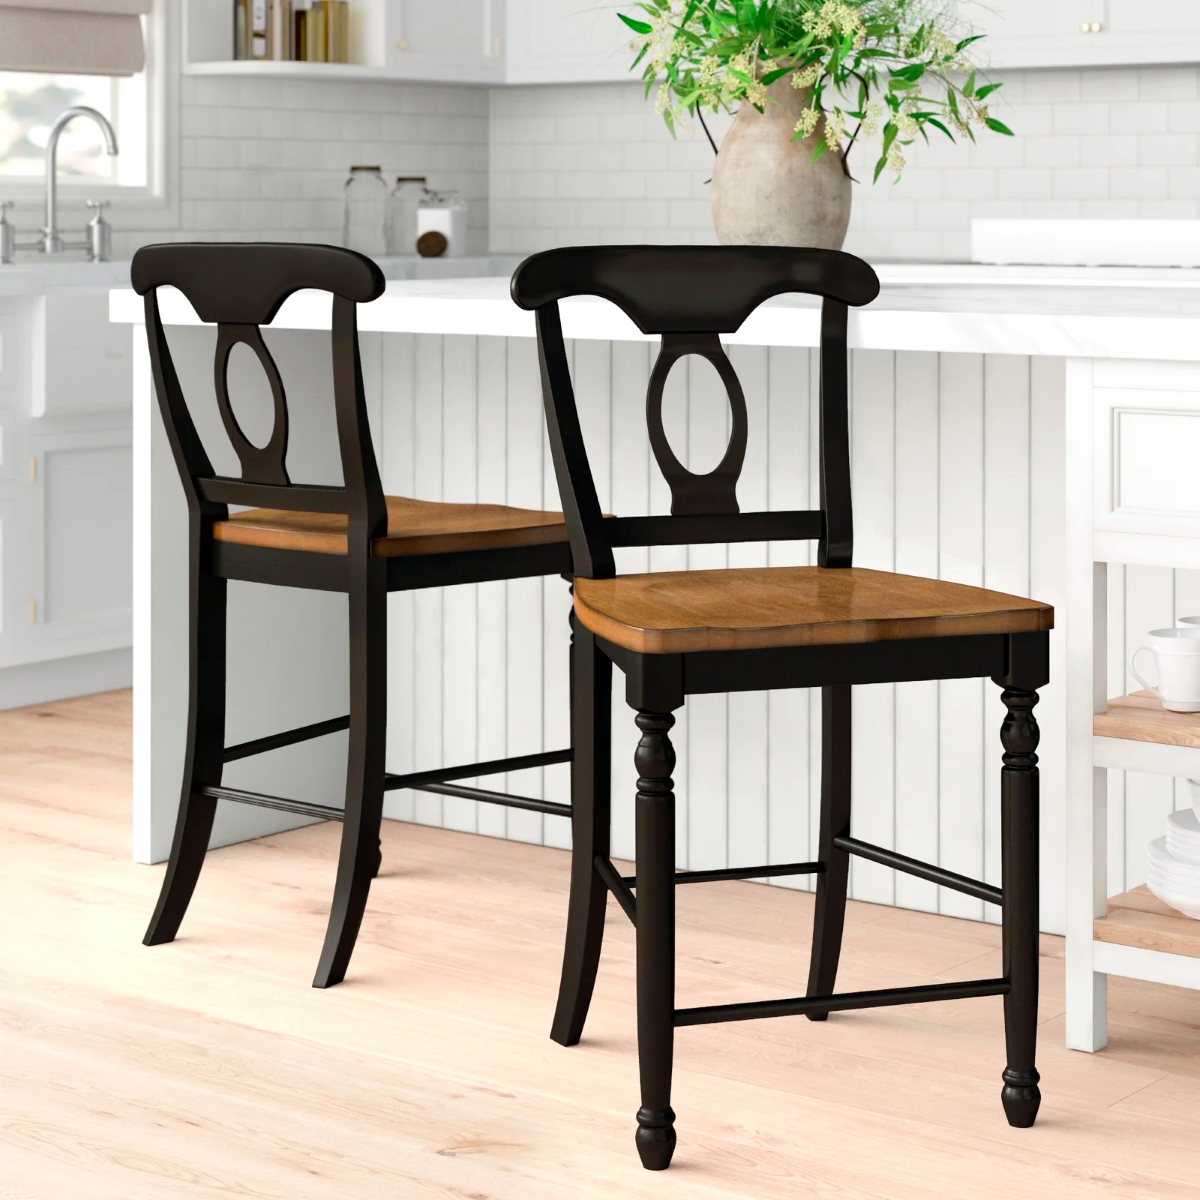 Two black wooden counter stools.